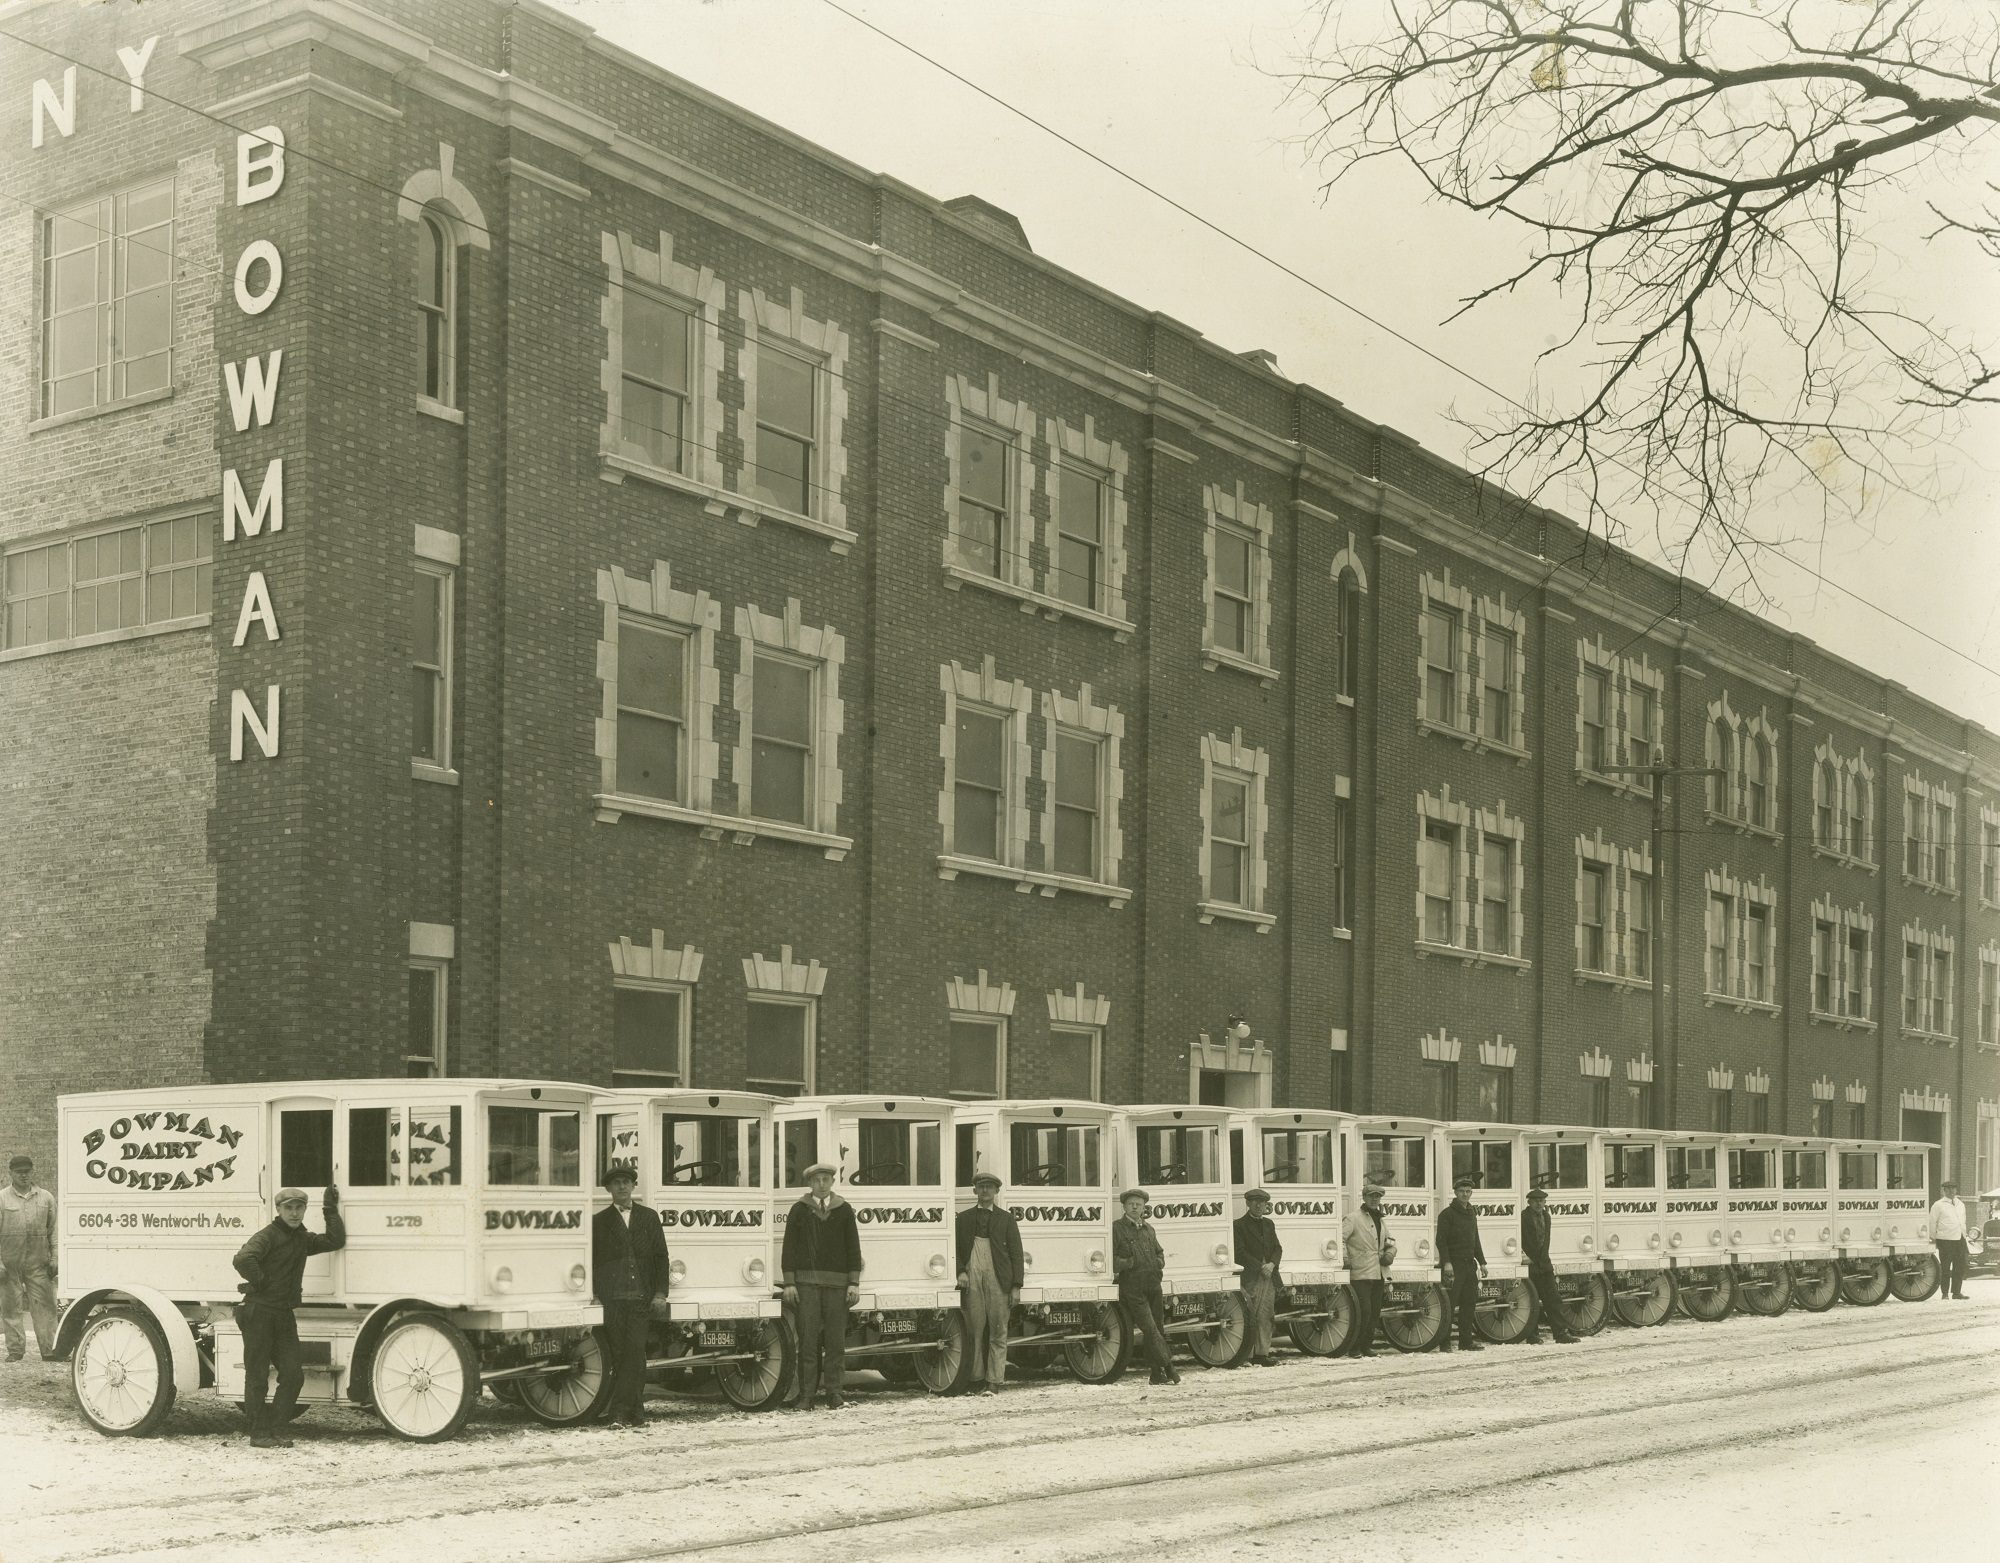 Line of Bowman Dairy trucks and drivers outside of a Bowman Dairy building, Chicago, Illinois, 1915.